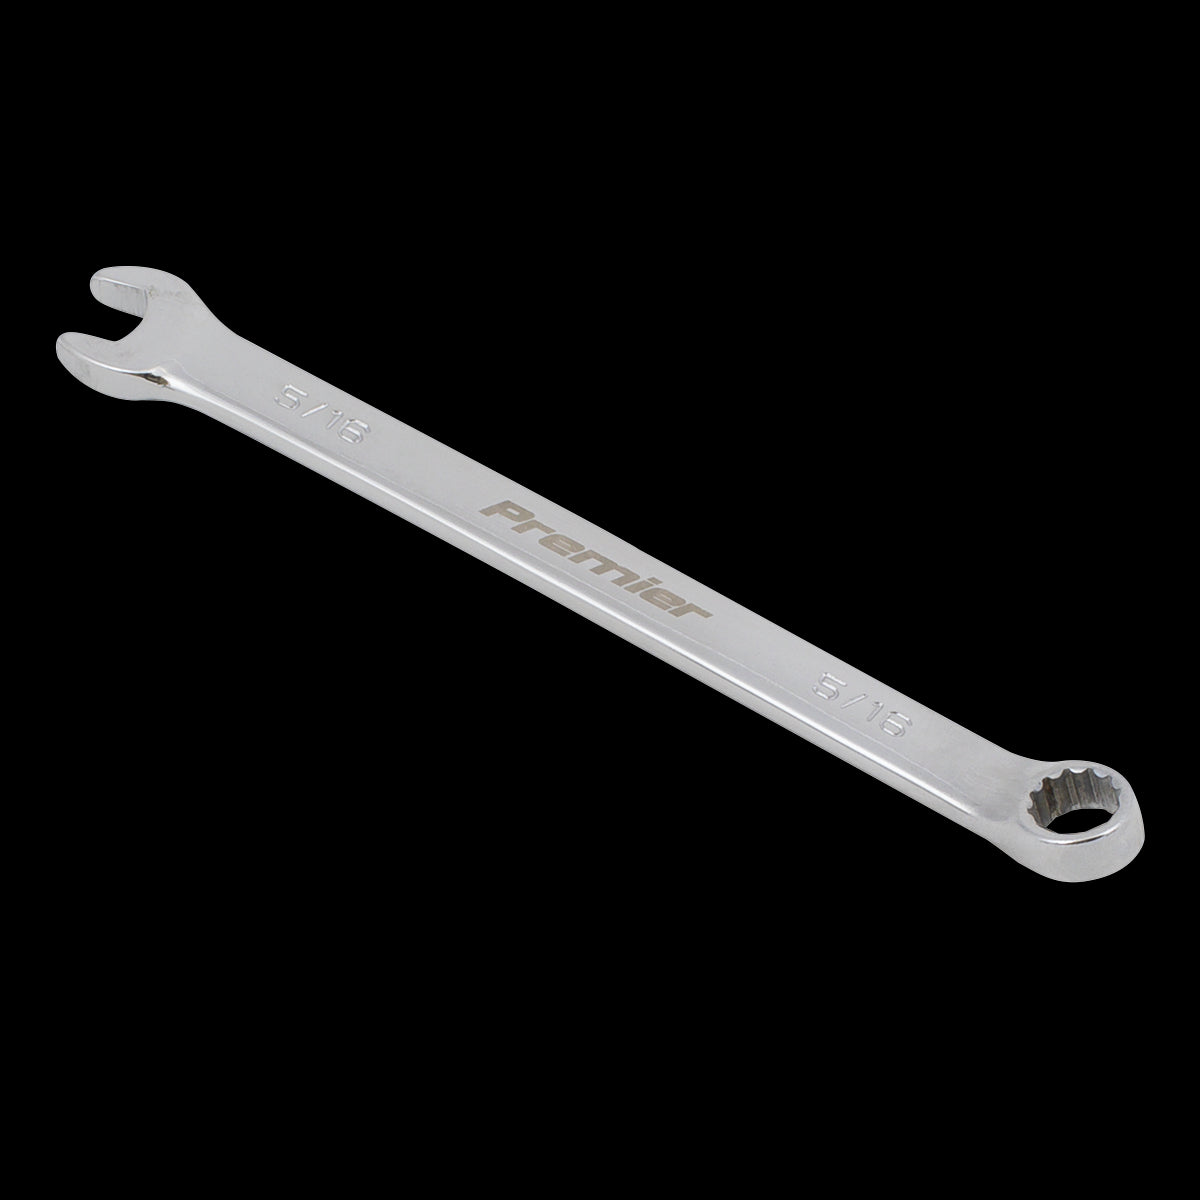 Sealey Premier Combination Spanner 5/16" - Imperial